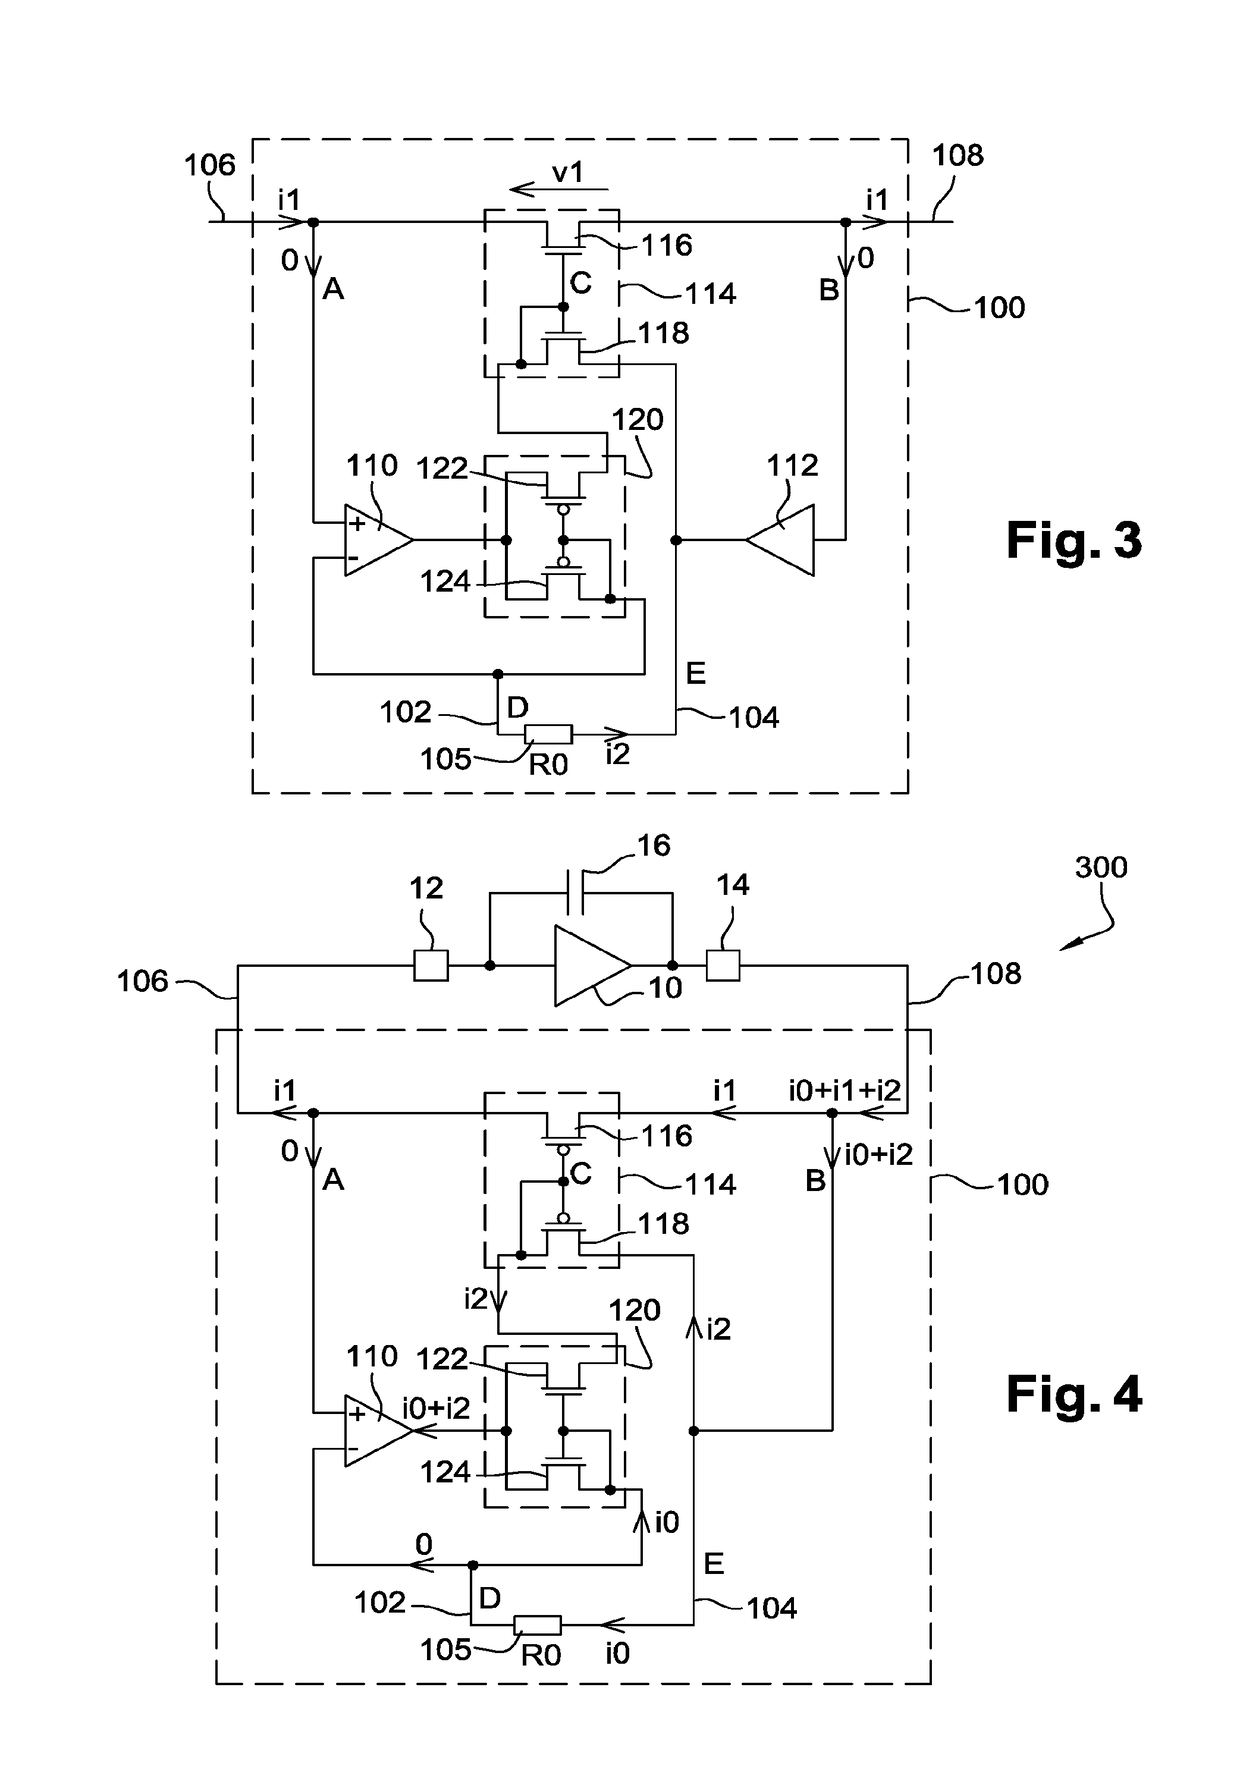 Device modifying the impedance value of a reference resistor